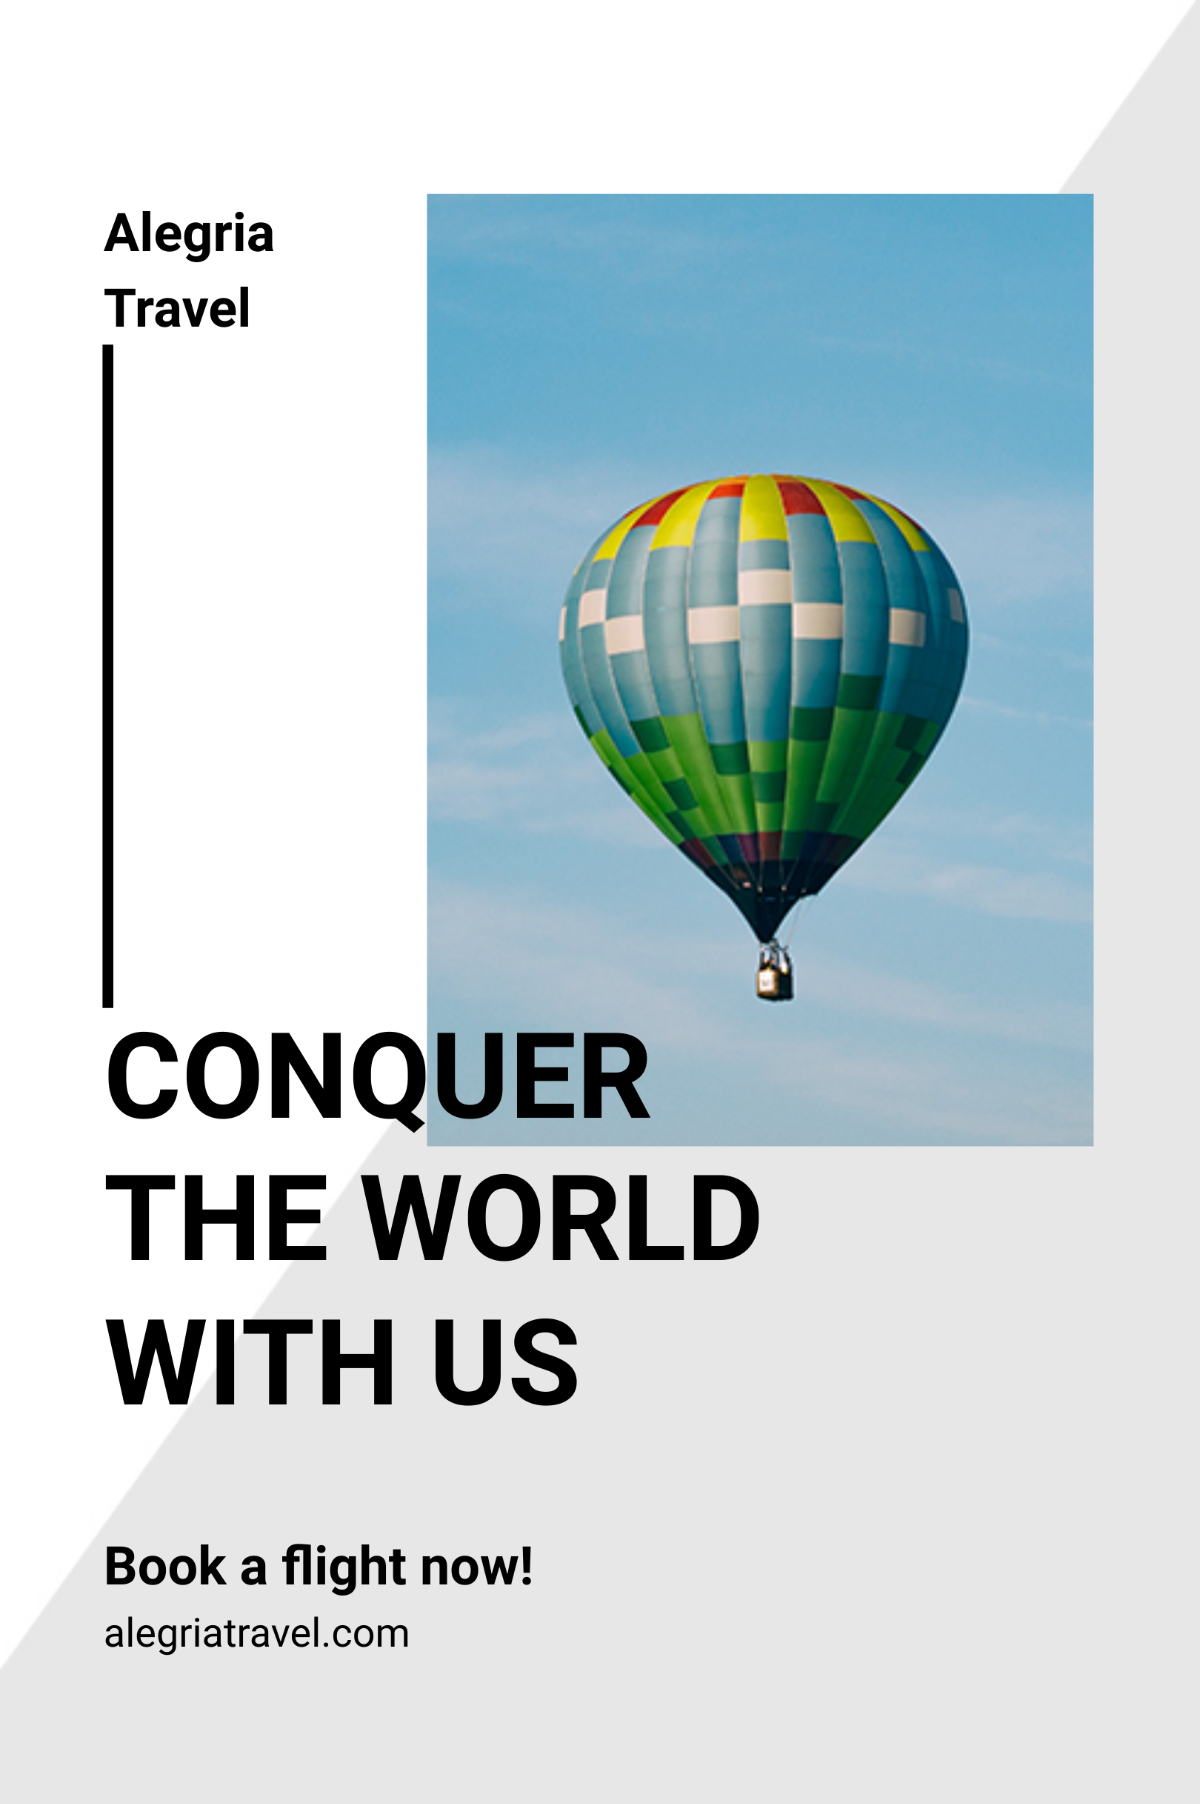 Travel Trends Tumblr Post Template